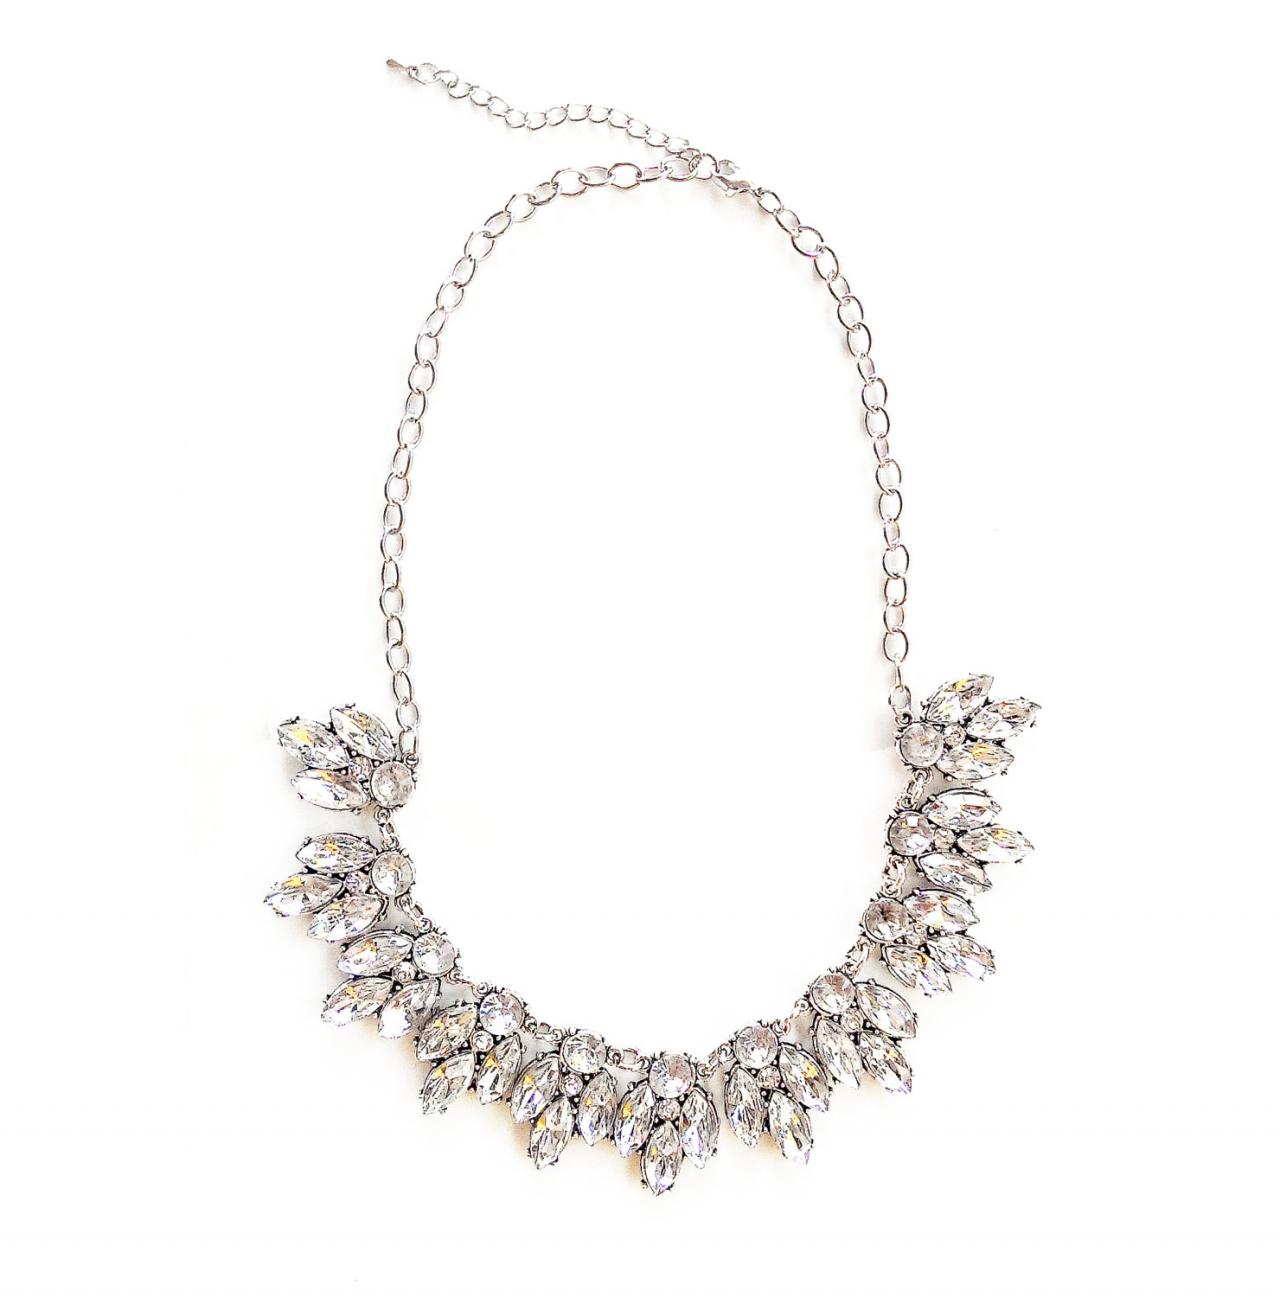 White Crystal Statement Necklace For Bridesmaid Bridal Wedding Jewelry Gift Idea